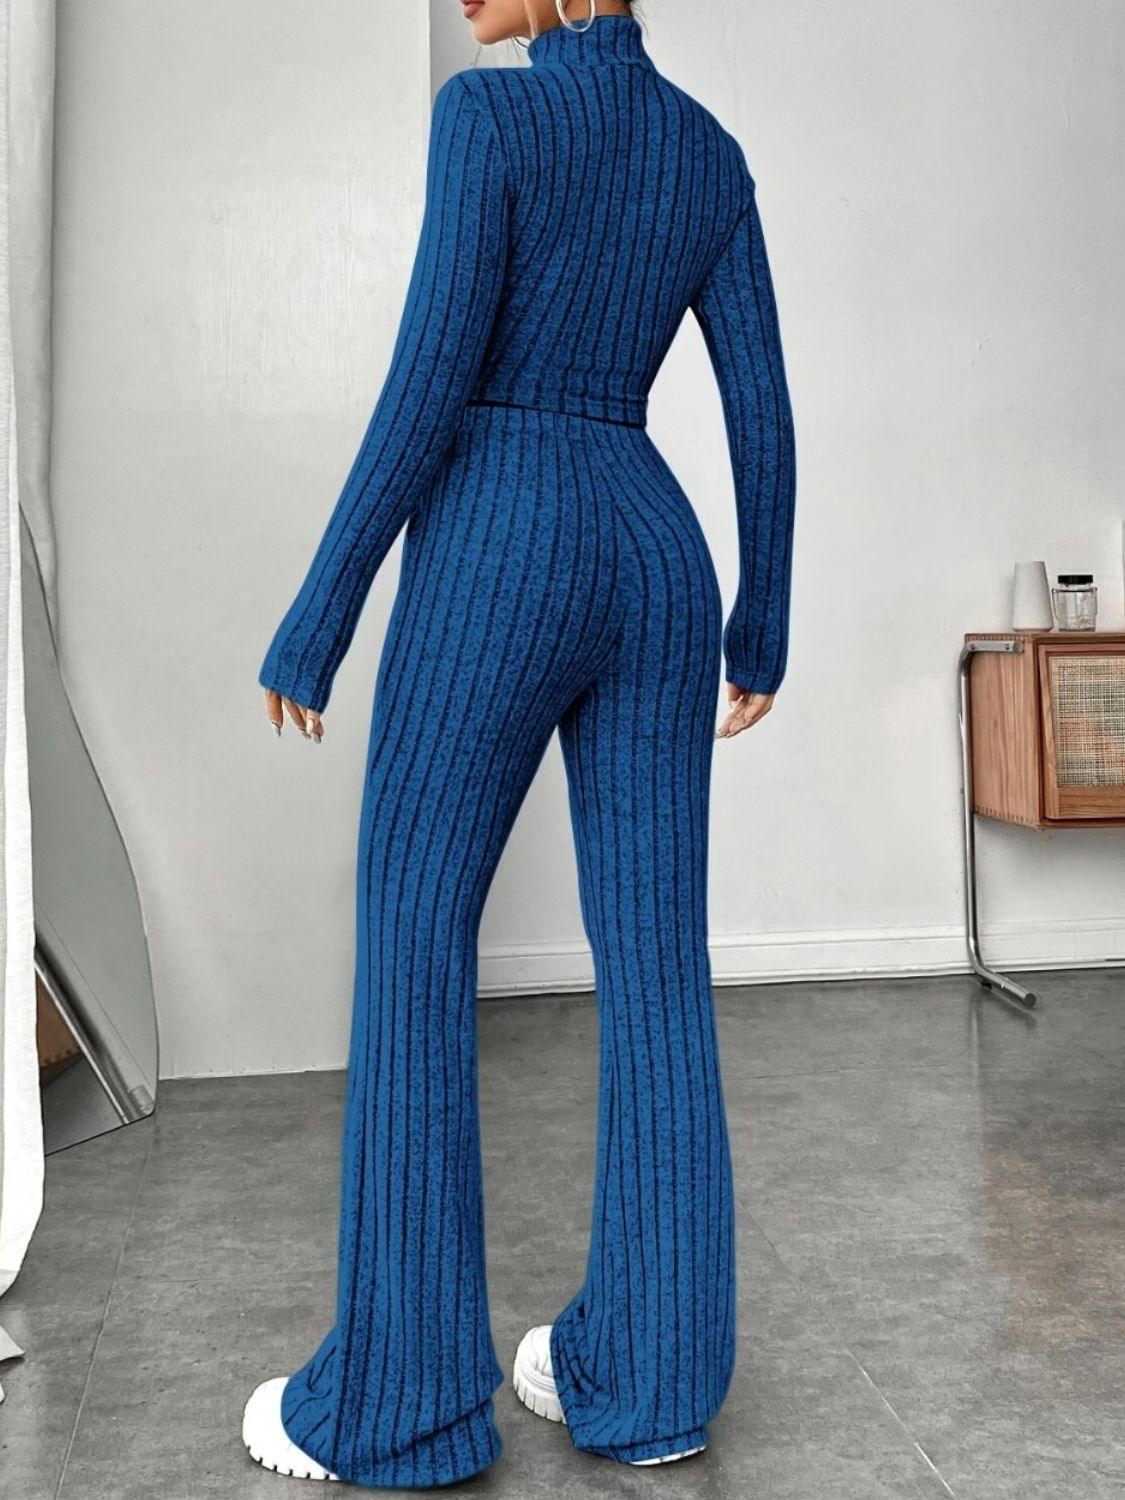 a woman wearing a blue knitted jumpsuit